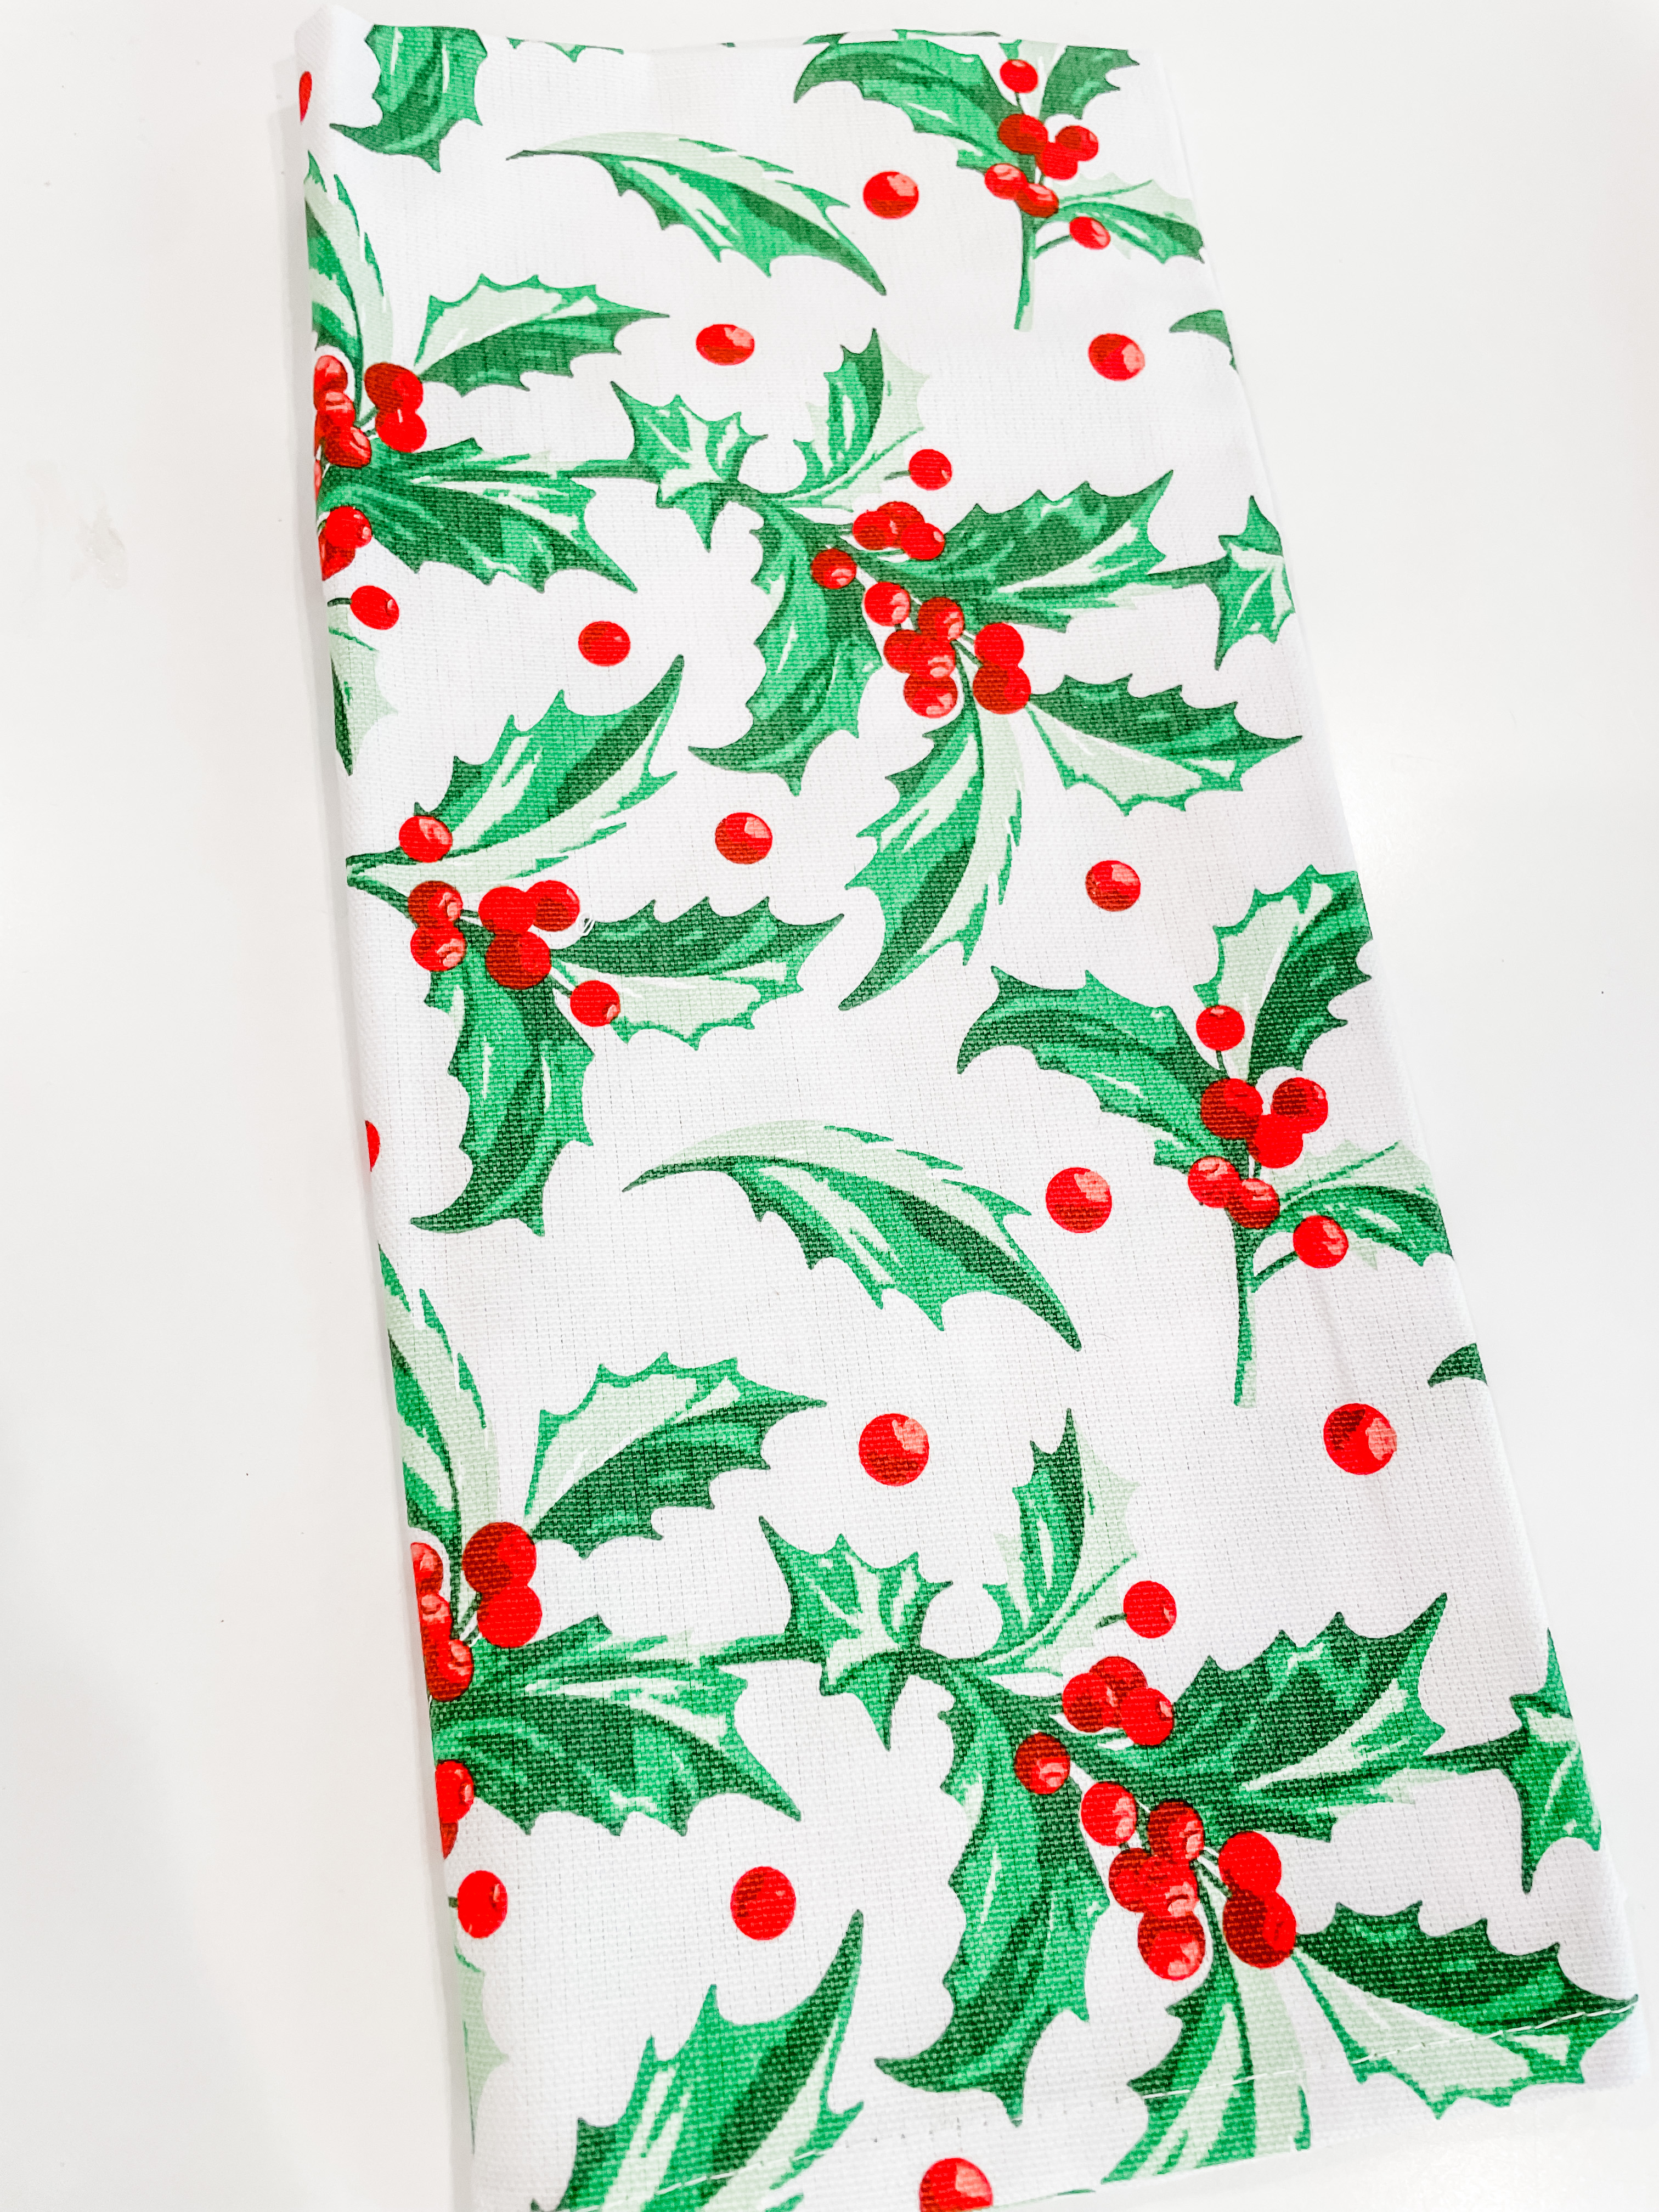 Holly Kitchen Towel